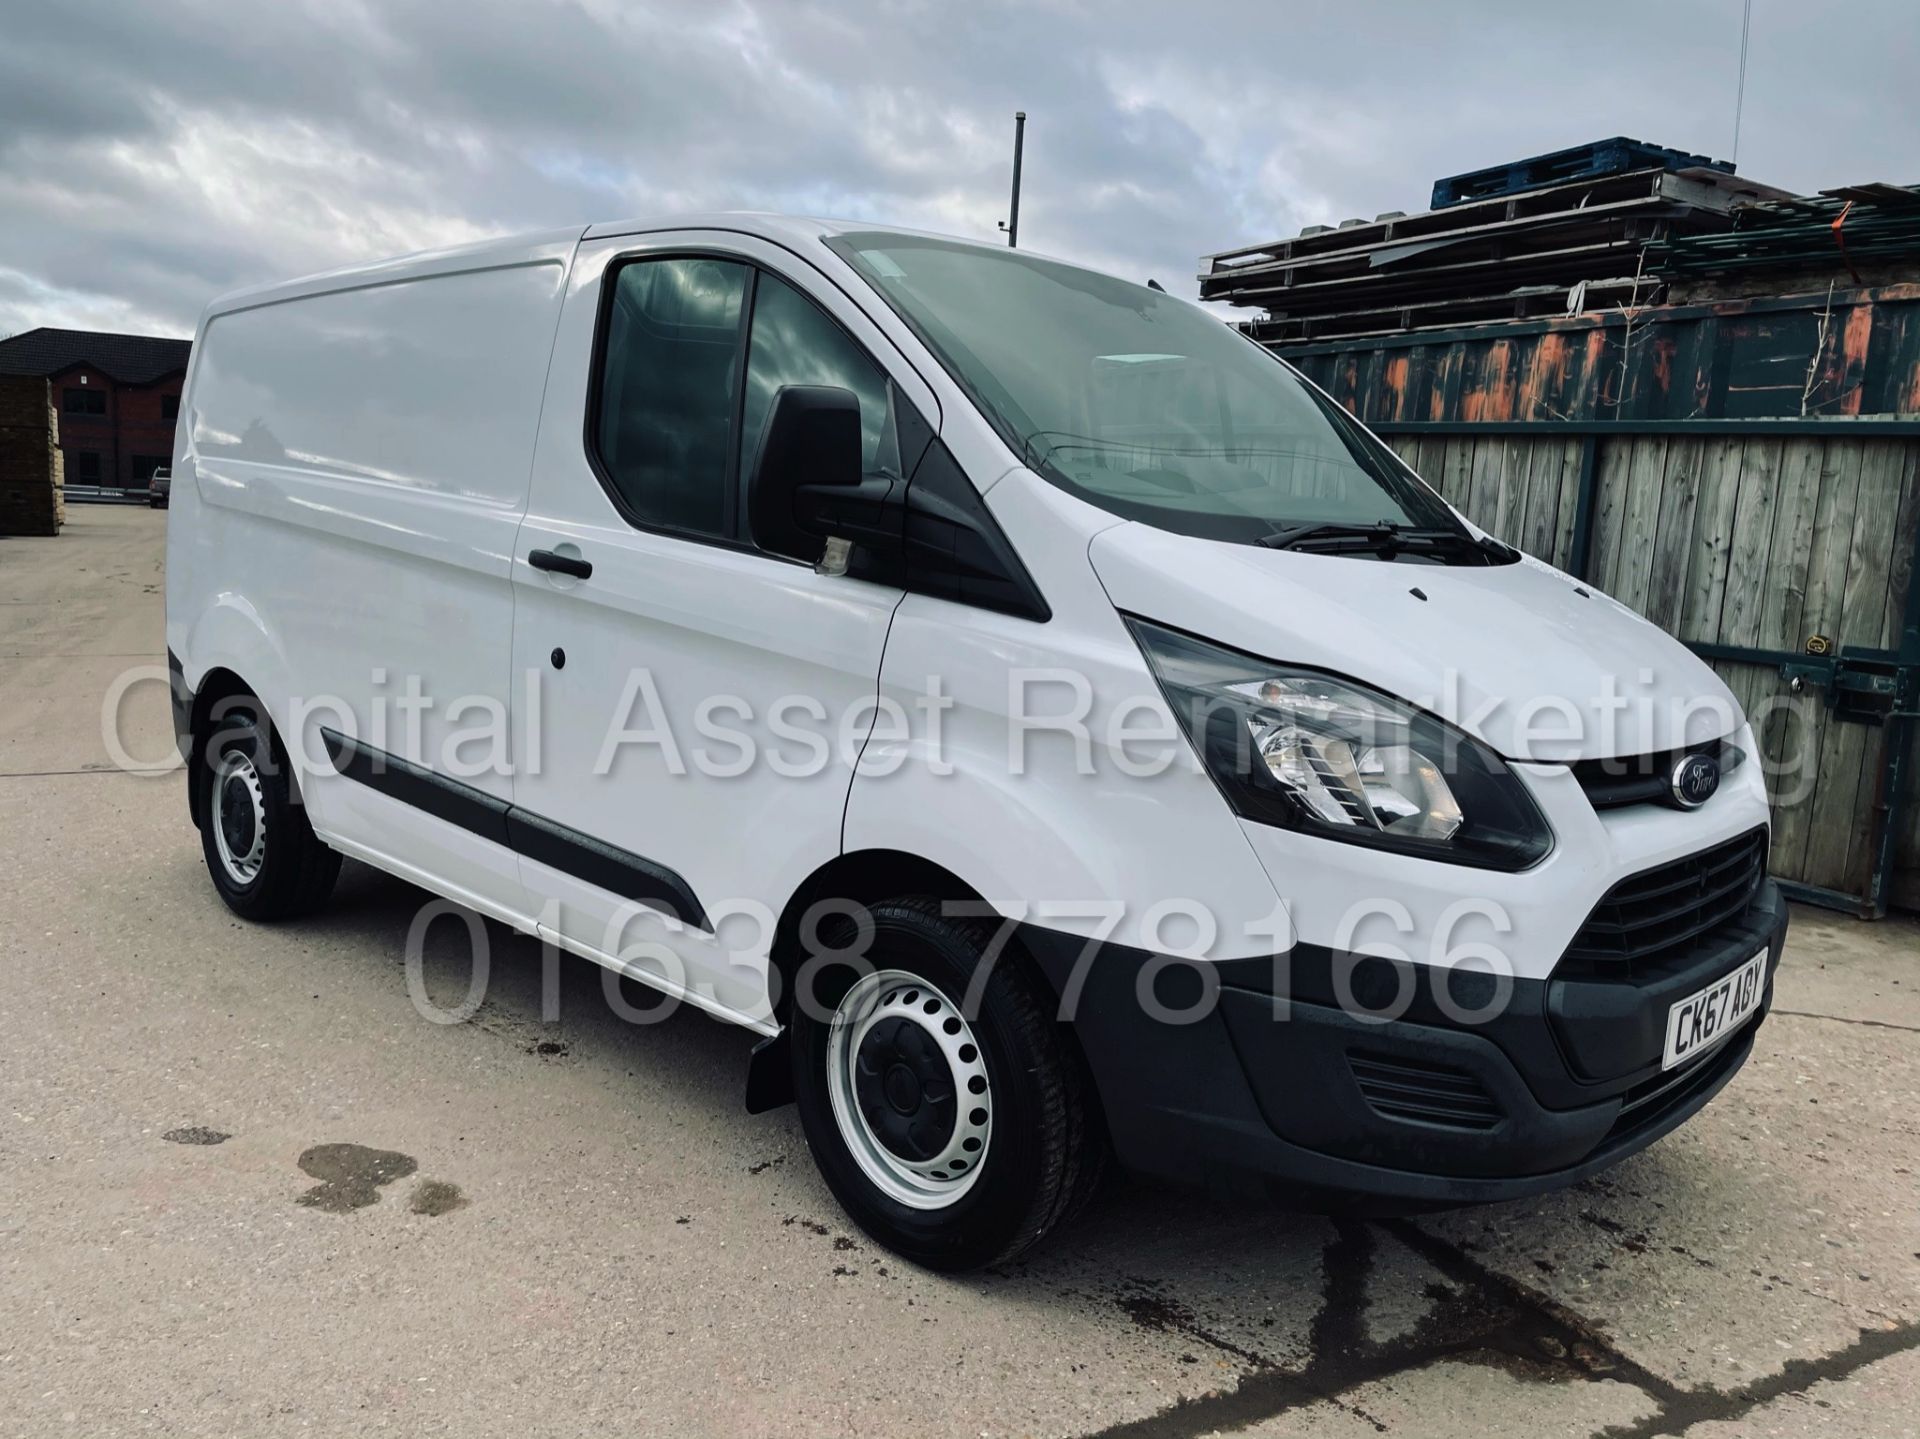 FORD TRANSIT CUSTOM 270 *SWB - PANEL VAN* (2018 - EURO 6) '2.0 TDCI - 6 SPEED' (1 OWNER FROM NEW) - Image 3 of 37